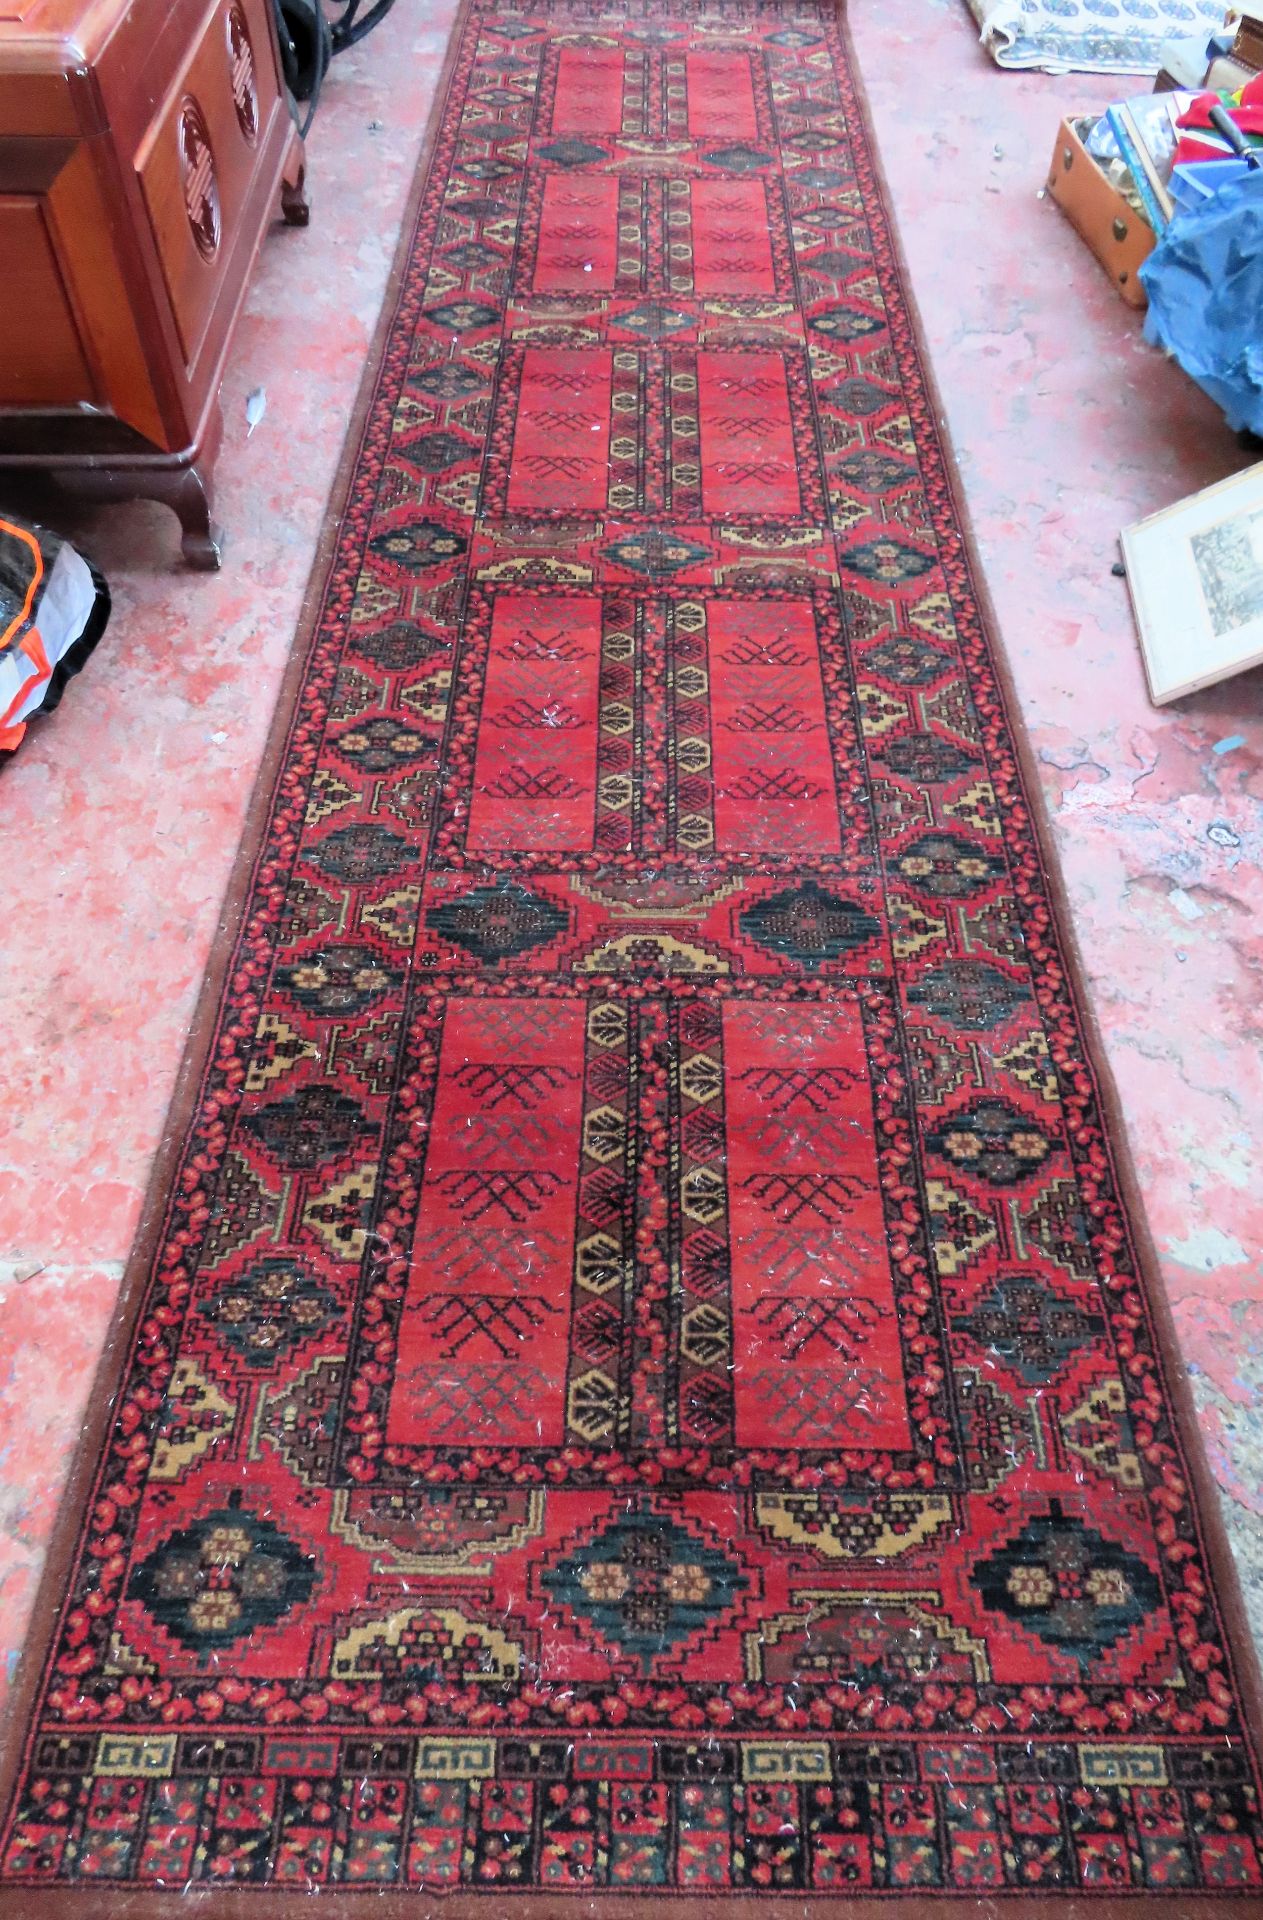 Decorative floor runner. Approx. 300 x 85cms used with minor wear etc